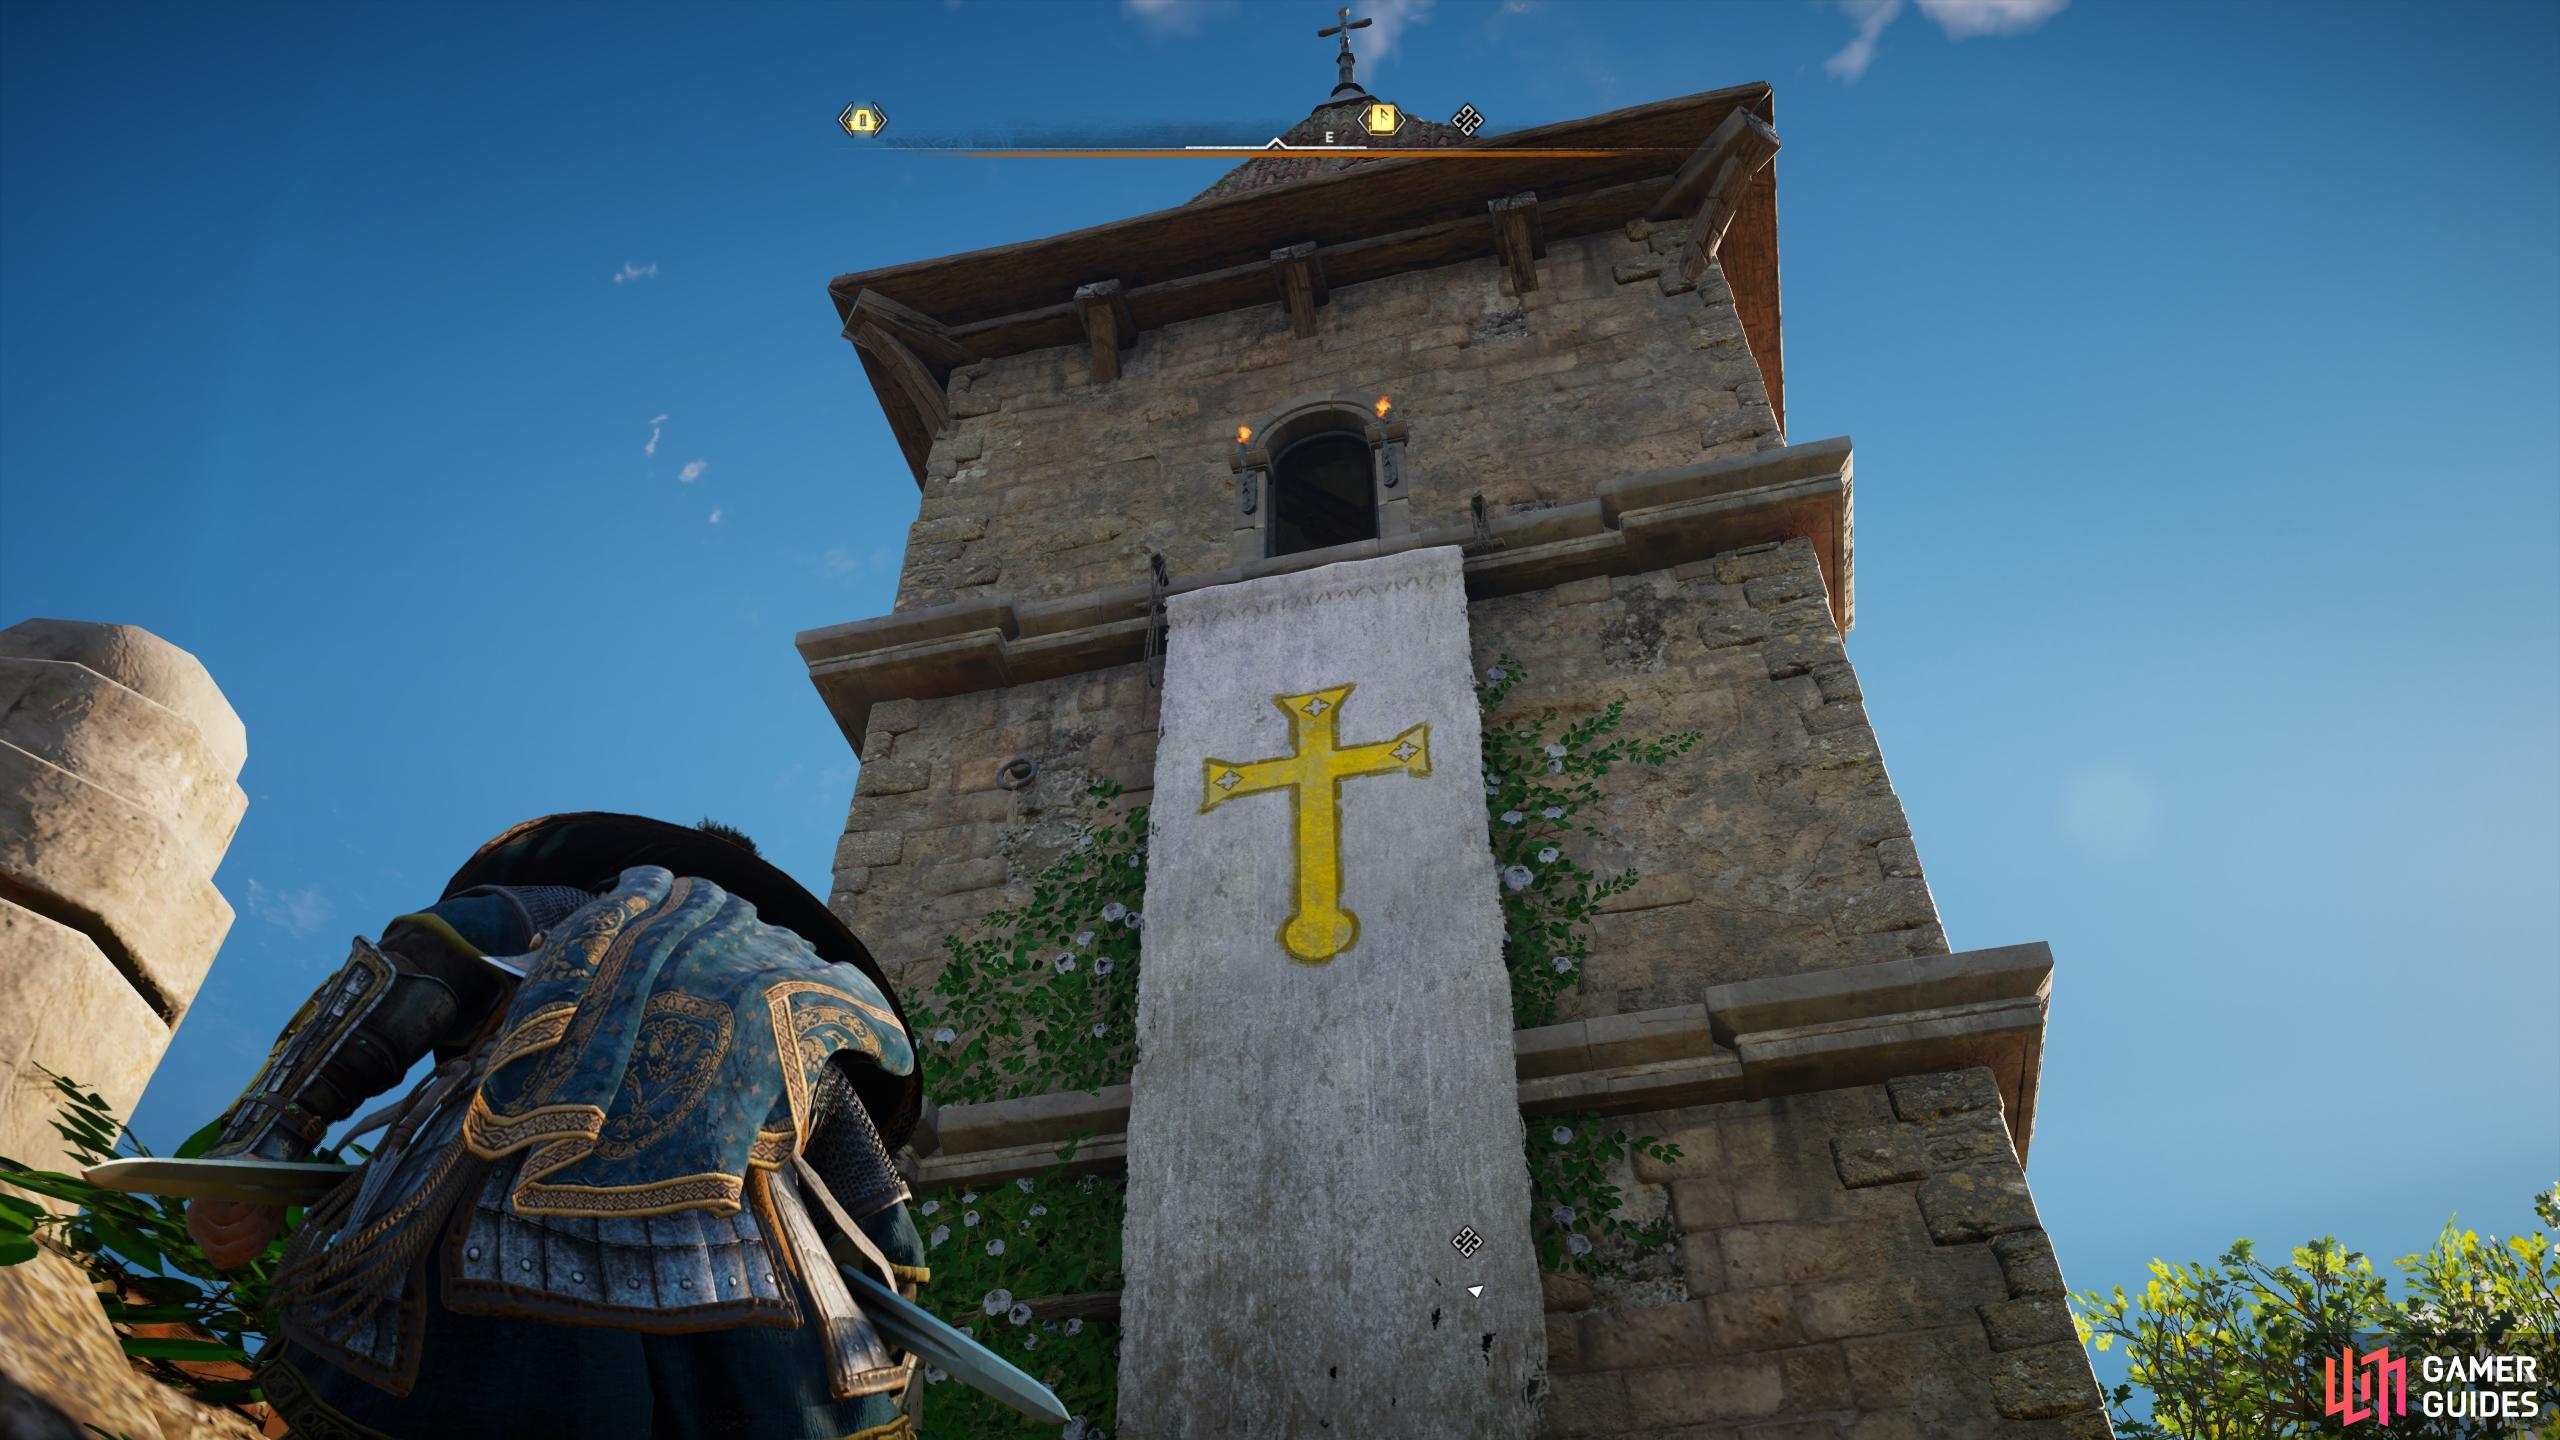 You'll need to climb the tower of the main church and jump through the window above the banner to enter it.